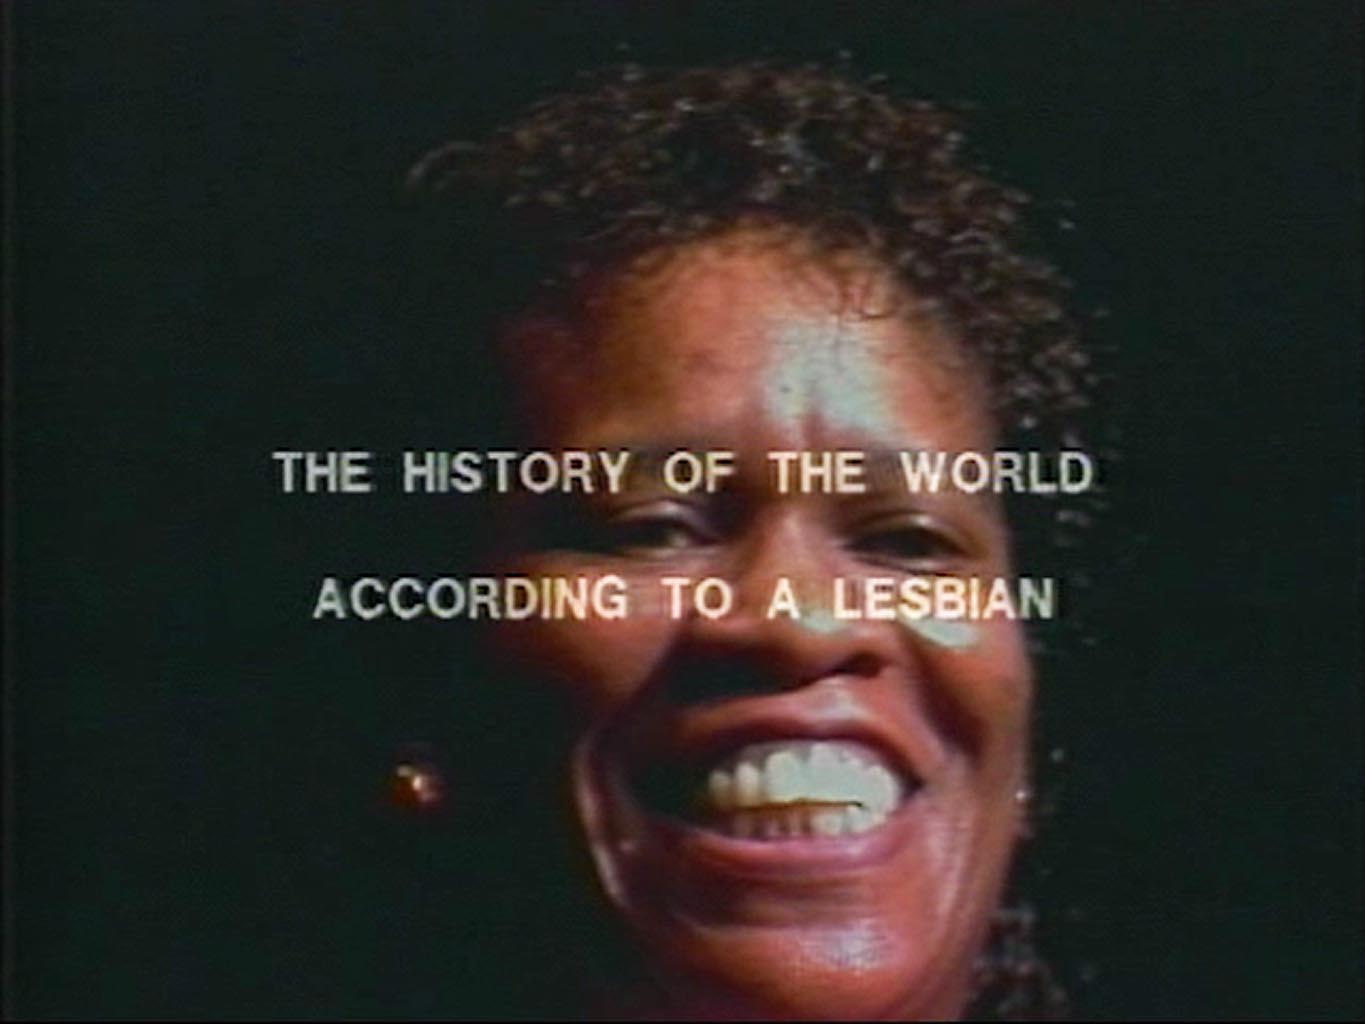 Image from The History of the World According to a Lesbian - film by Barbara Hammer